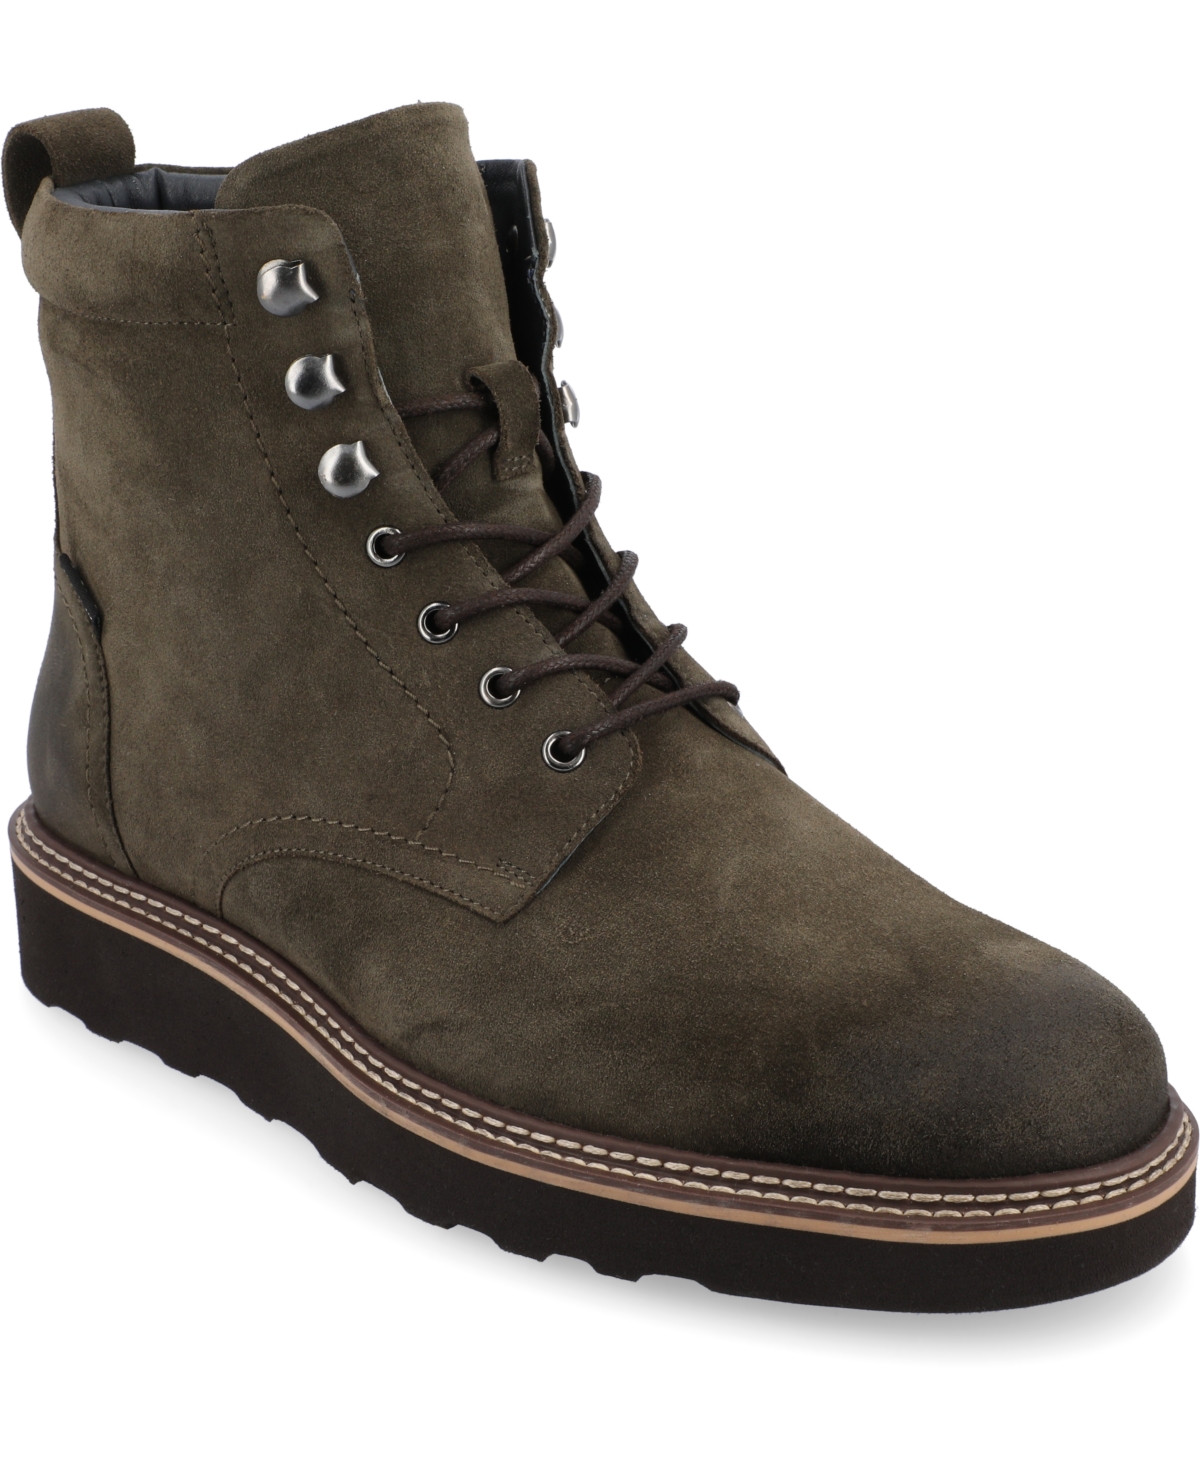 365 Men's Model 006 Wedge Sole Lace-Up Boots - Olive